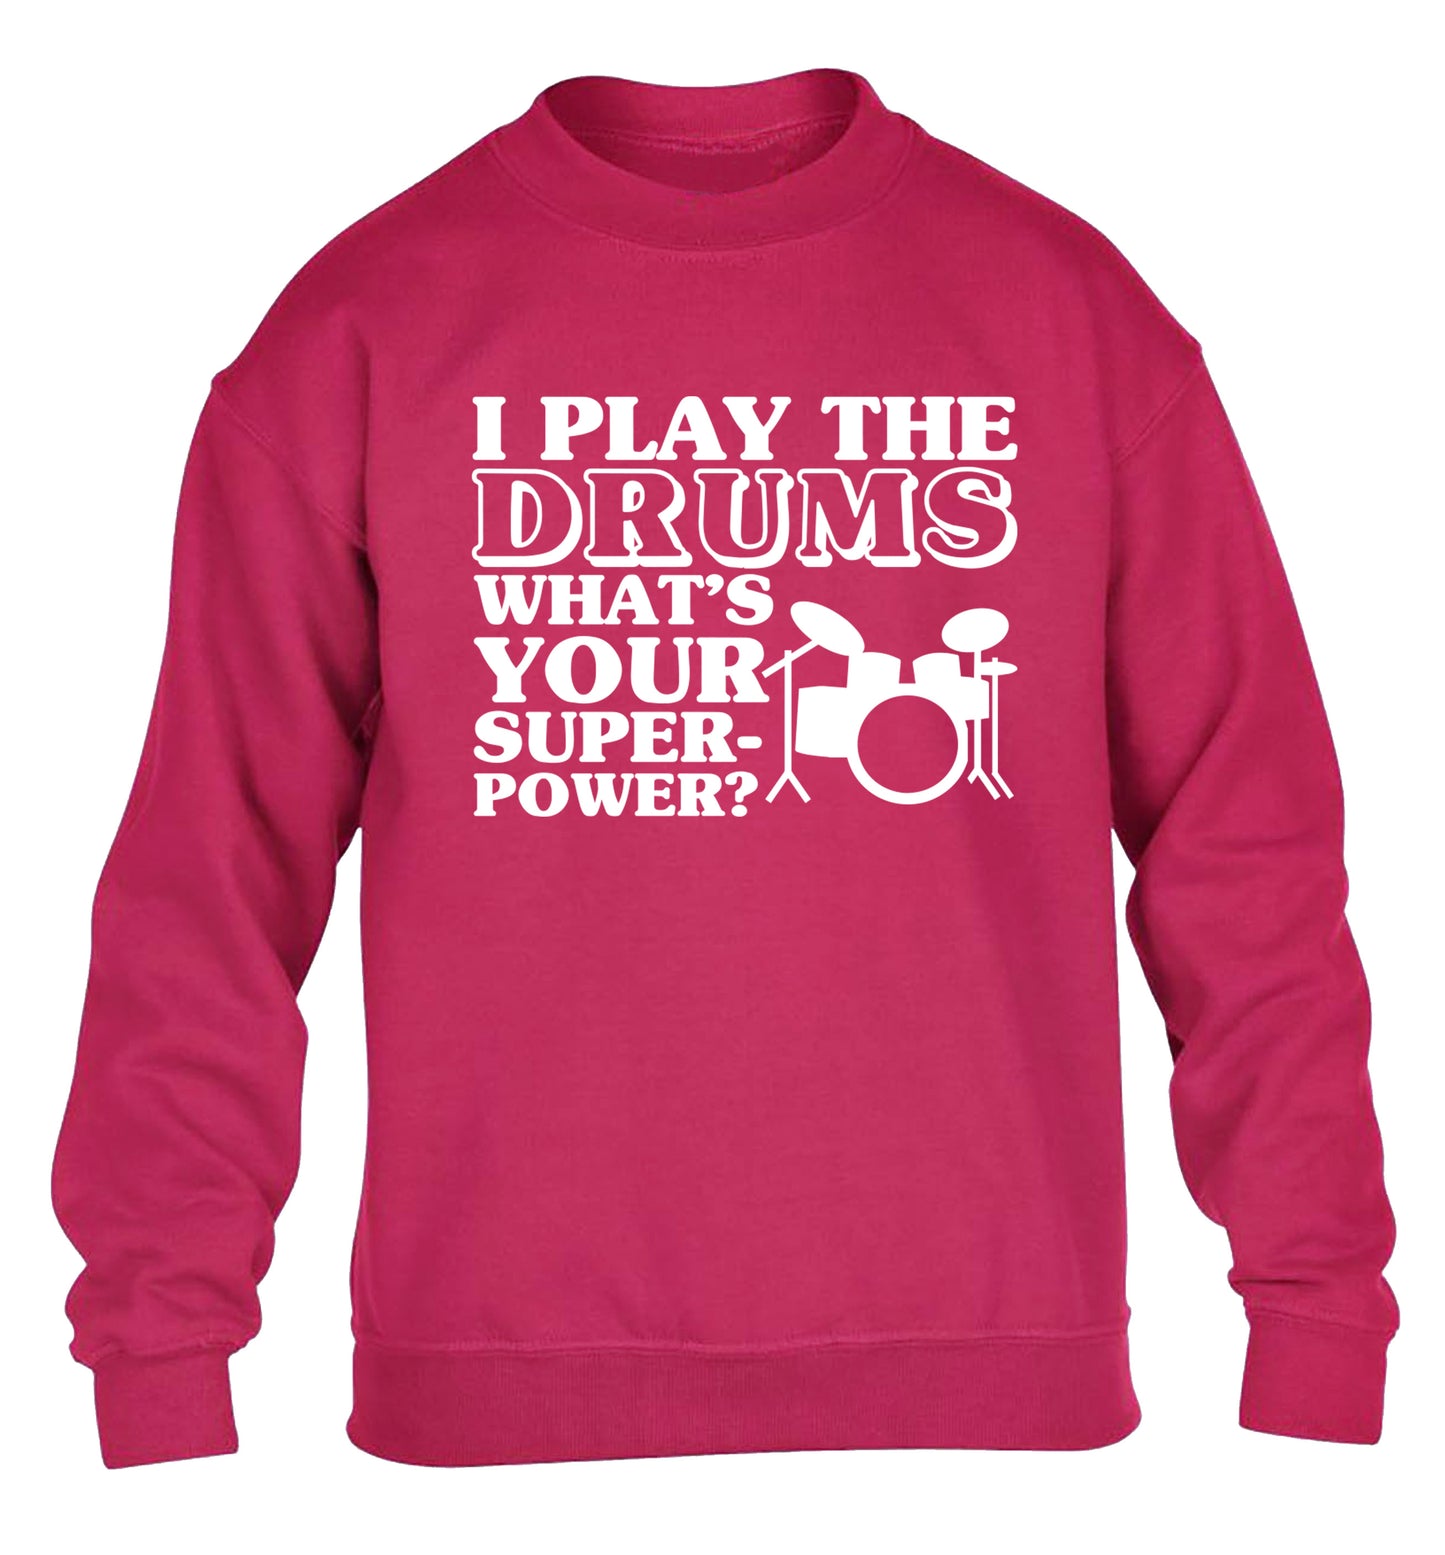 I play the drums what's your superpower? children's pink sweater 12-14 Years